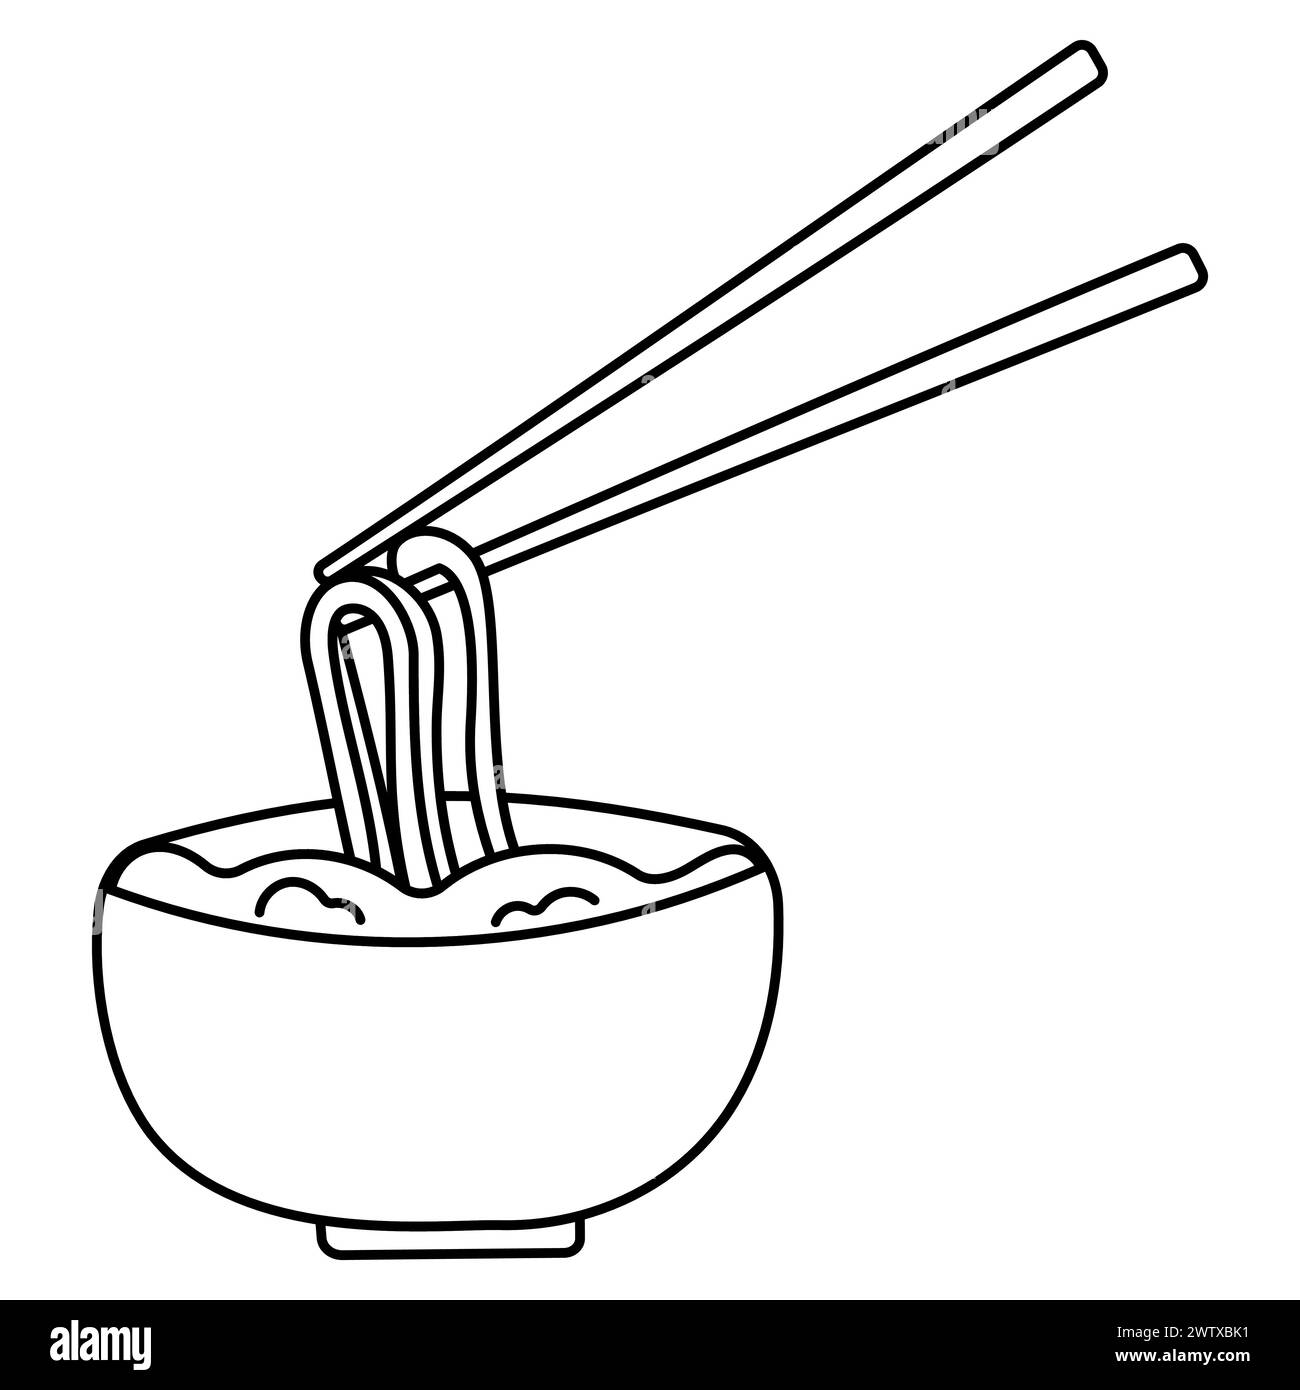 A household supply tool, chopsticks, stick out of a bowl filled with noodles. The balance of carmine soup adds a pop of color to the interior design. Stock Vector